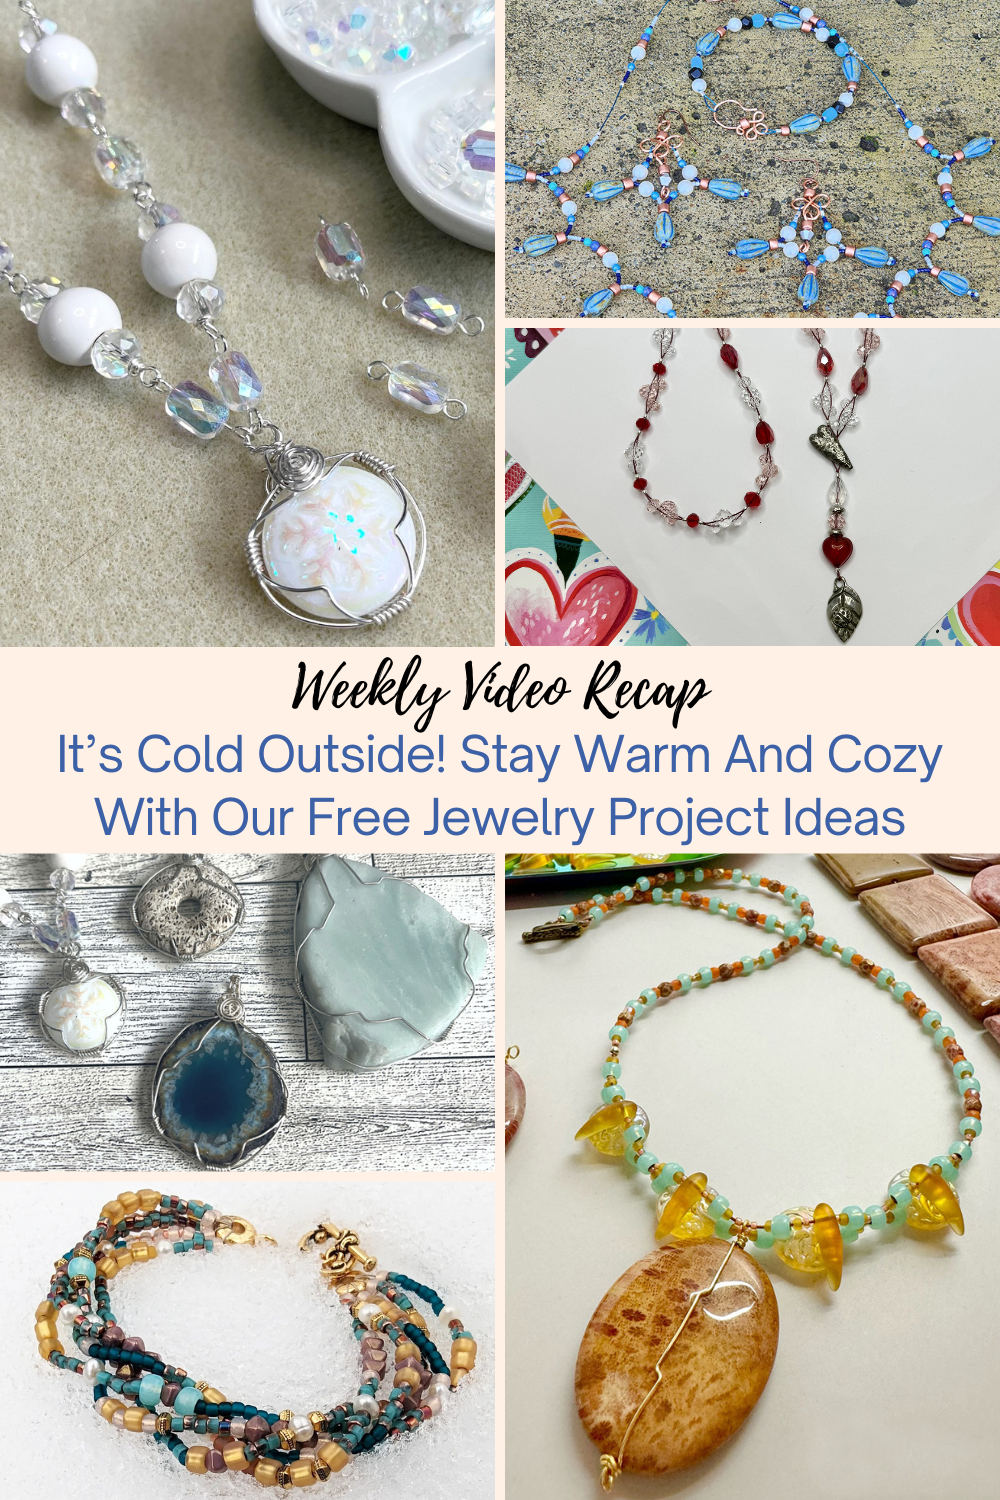 It's Cold Outside! Stay Warm And Cozy With Our Free Jewelry Project Ideas Collage